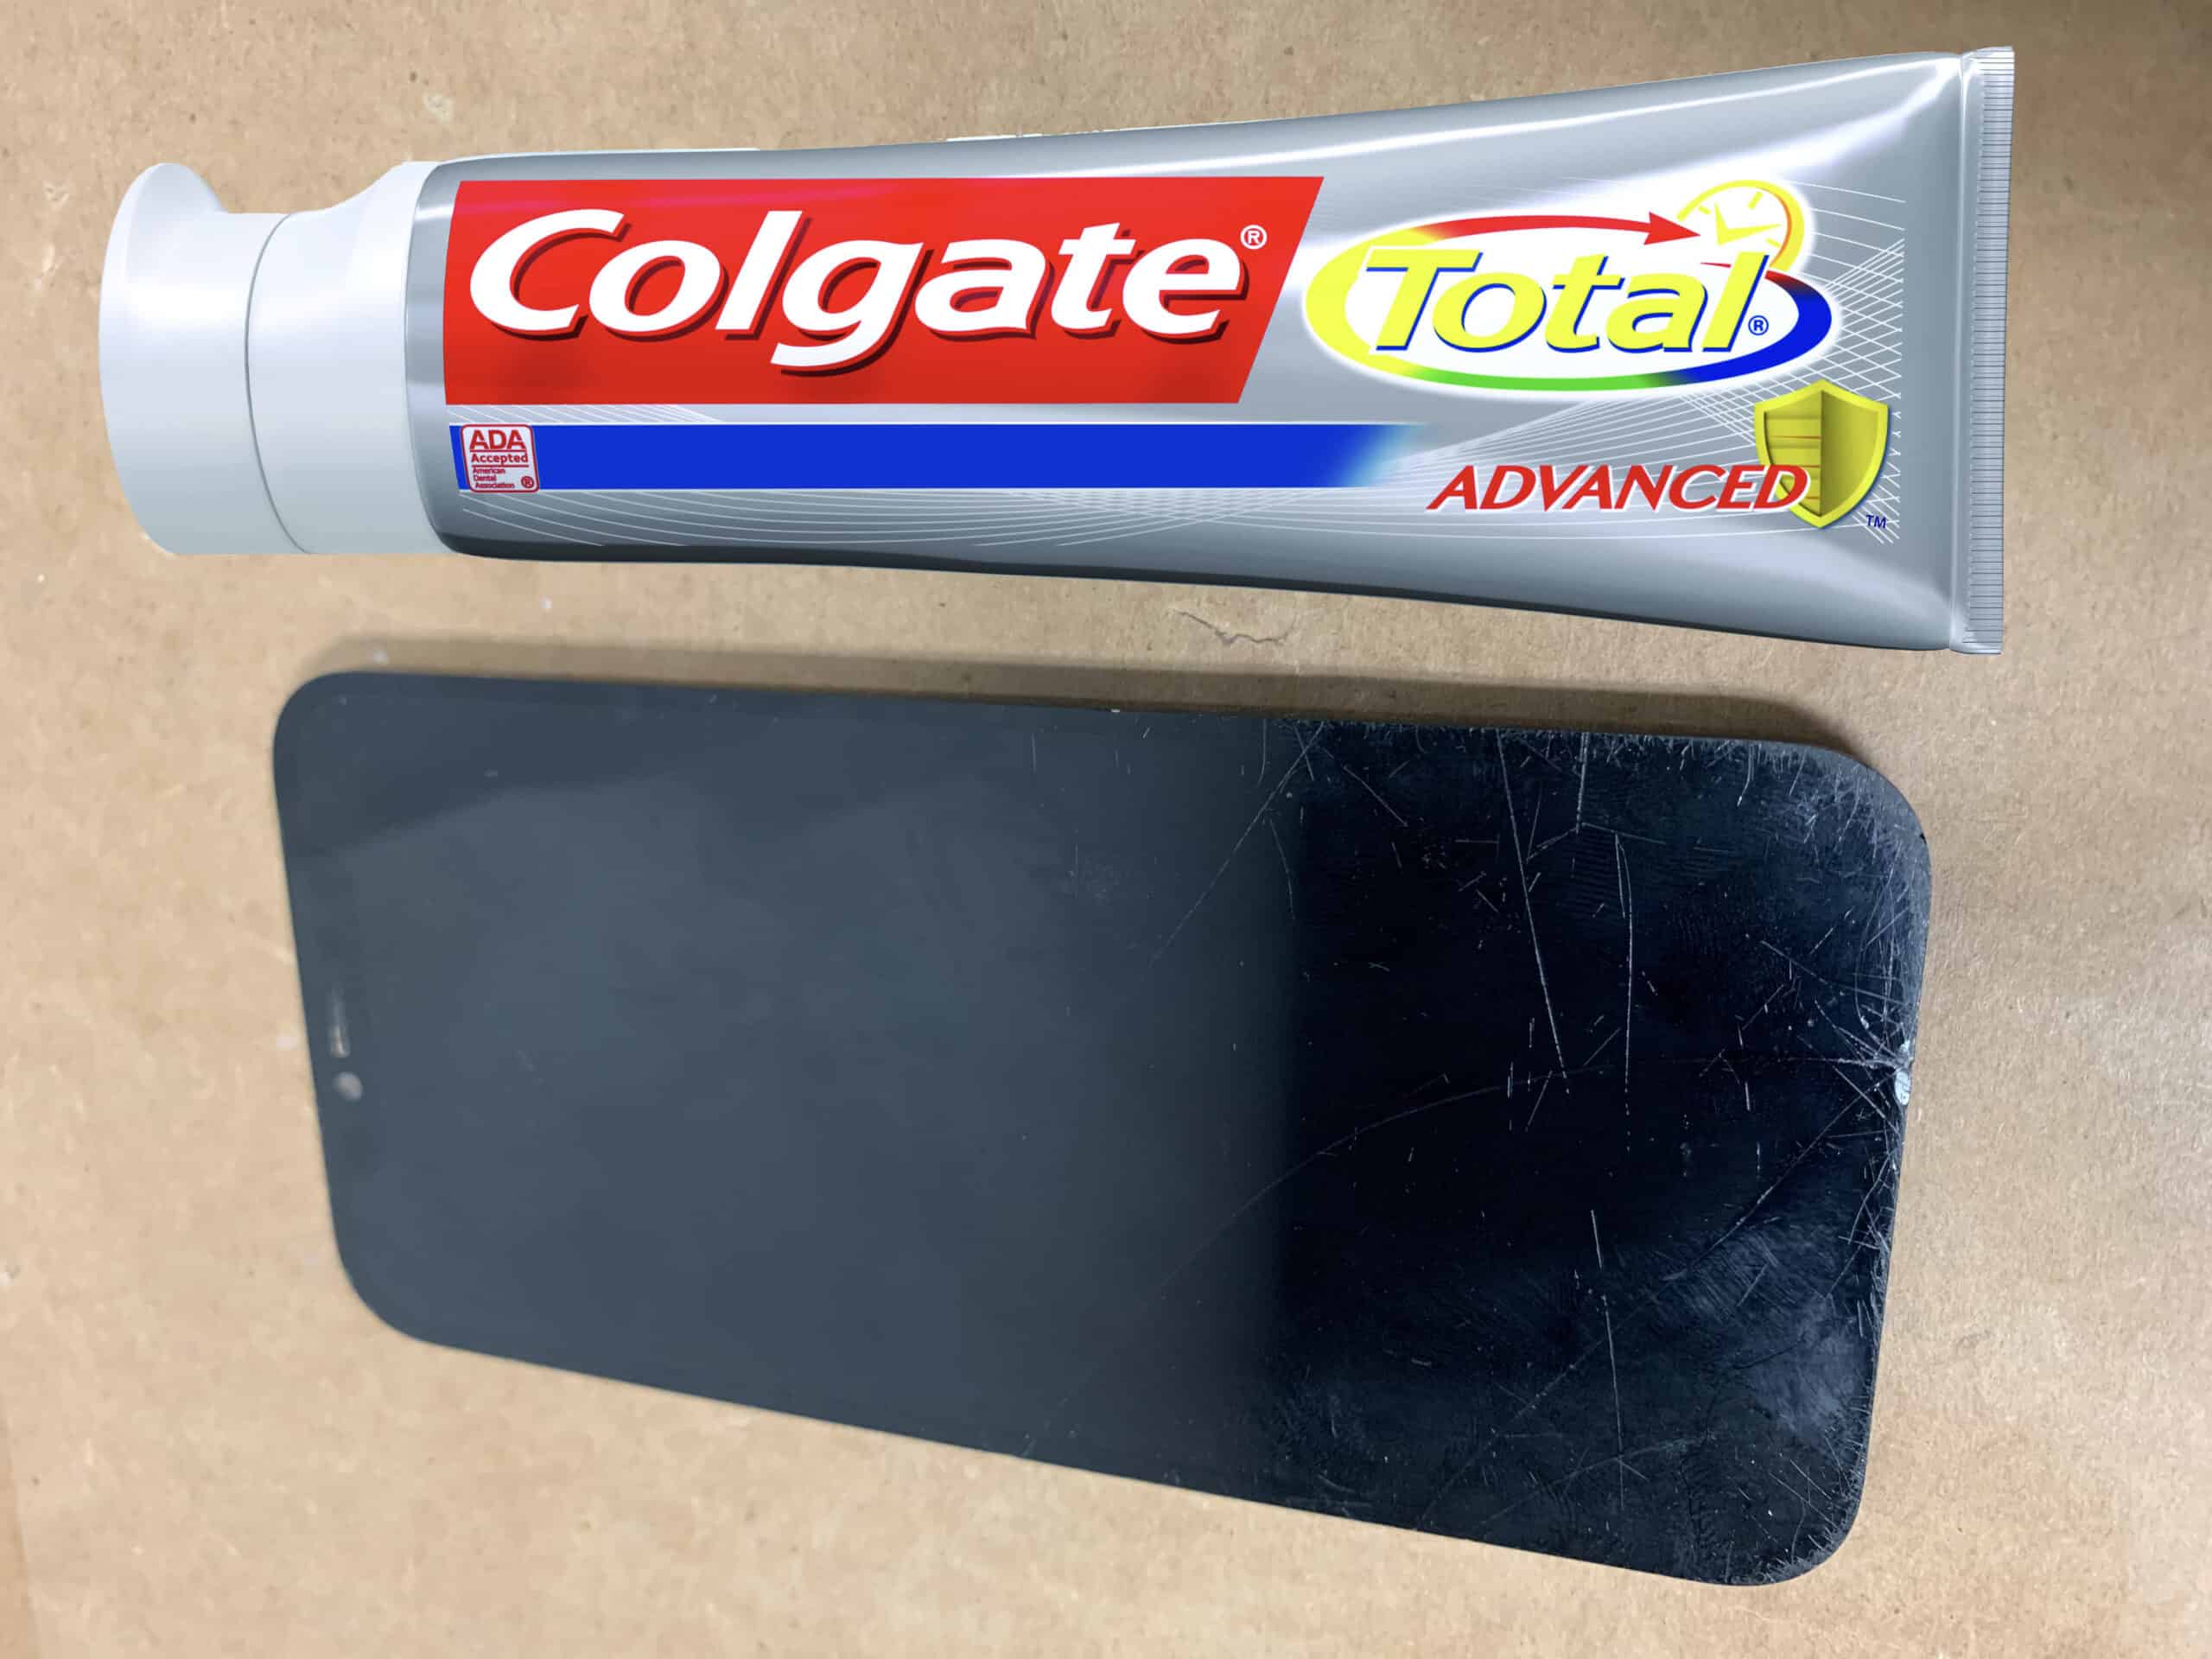 Can Toothpaste Fix A Cracked Screen?